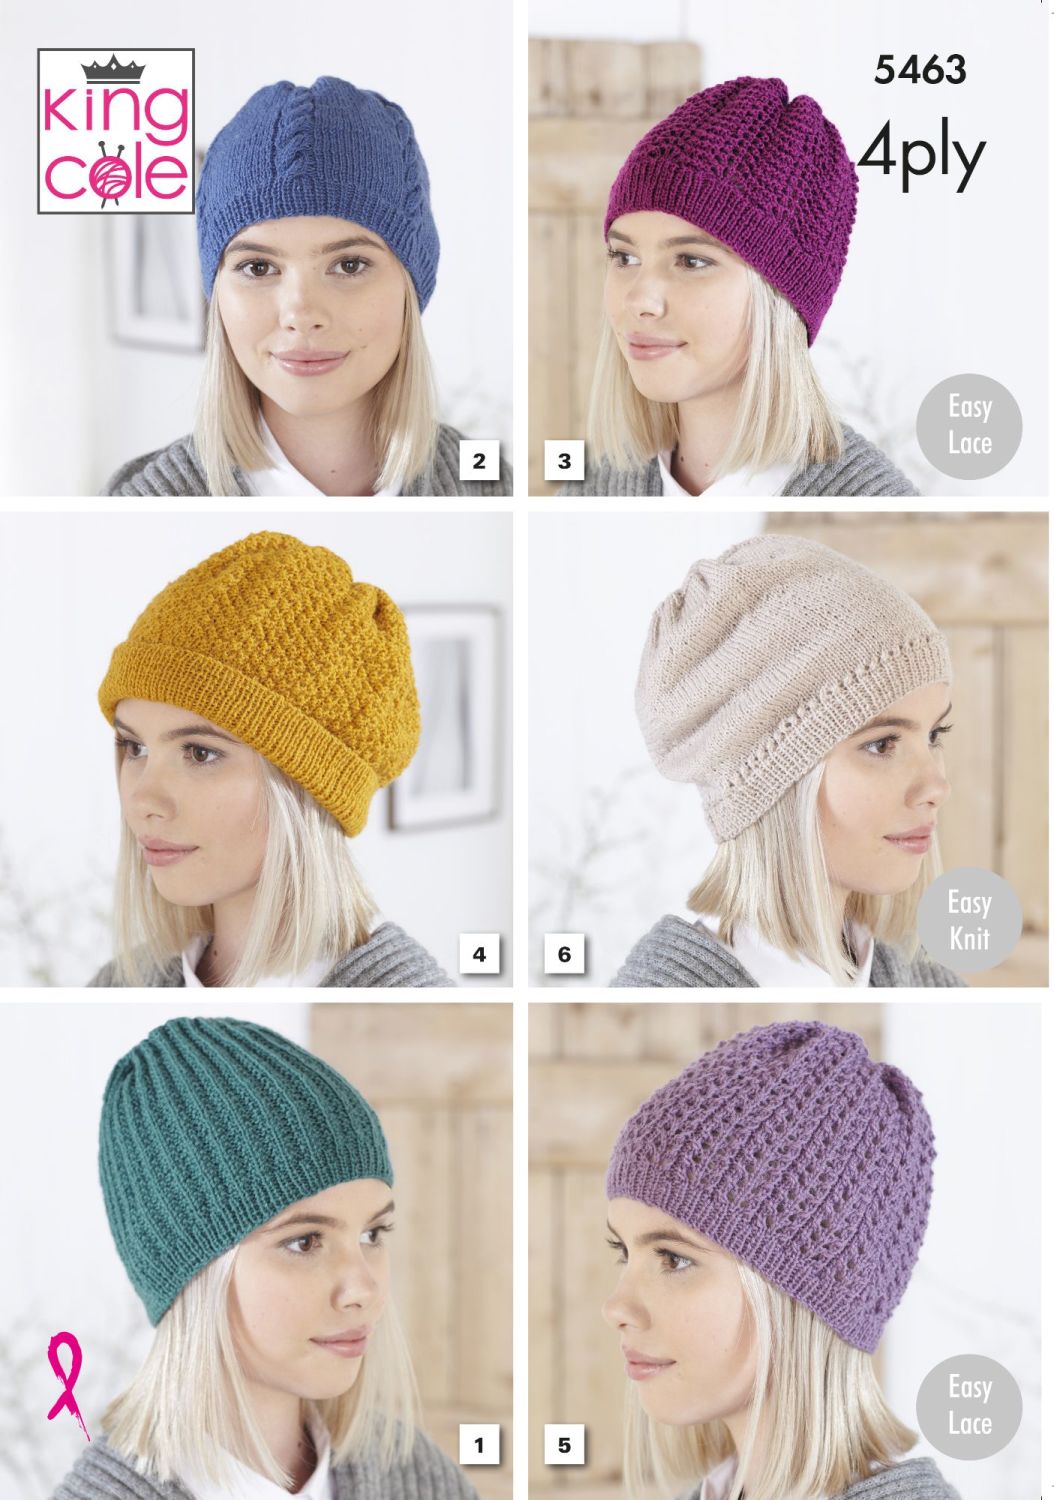 5463 Knitting Pattern - Ladies Hats in 4ply